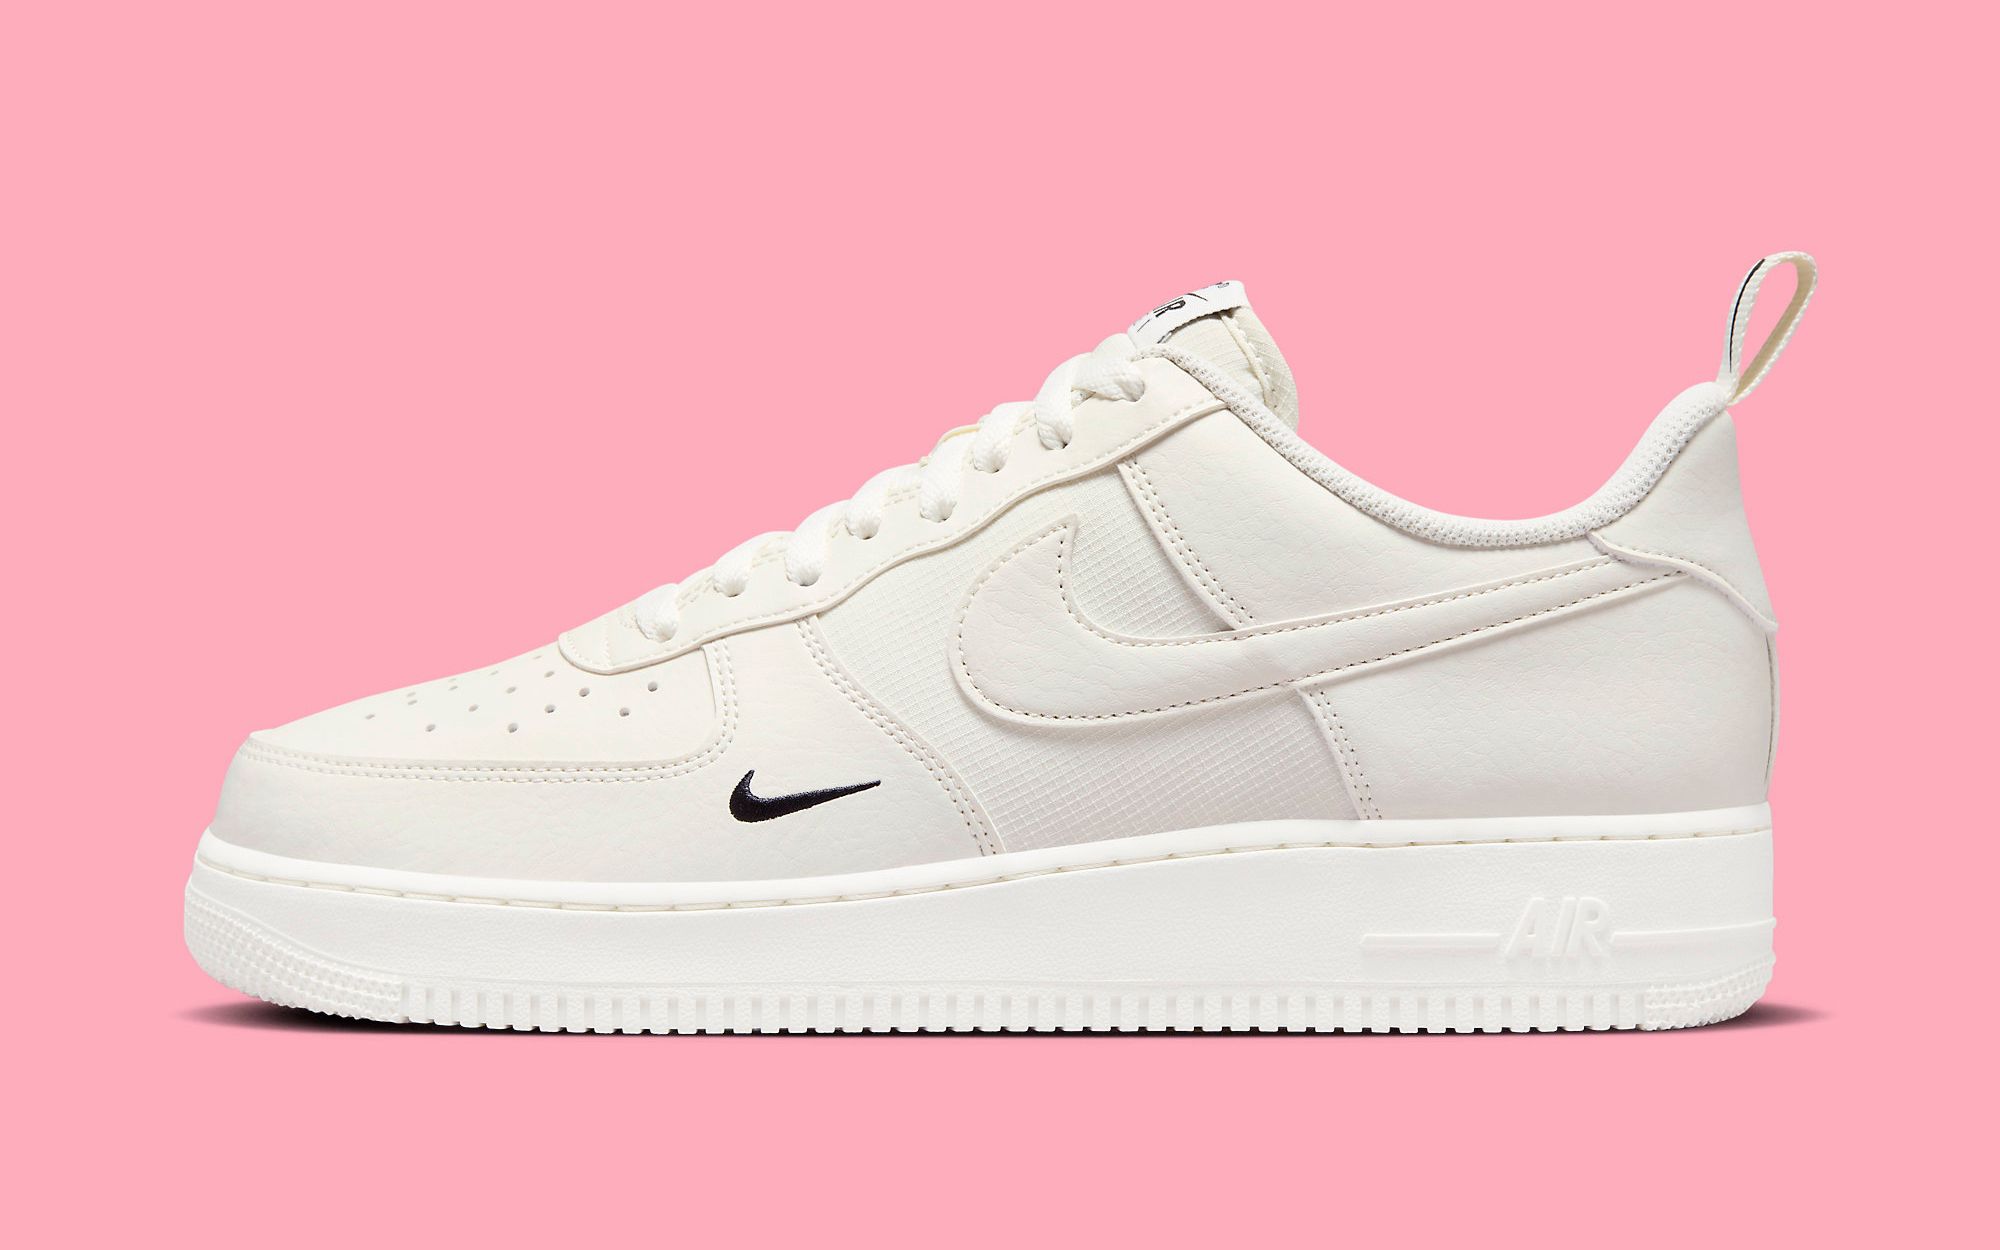 Nike Reconstruct the Air Force 1 Low with Ripstop and Rear Pulls